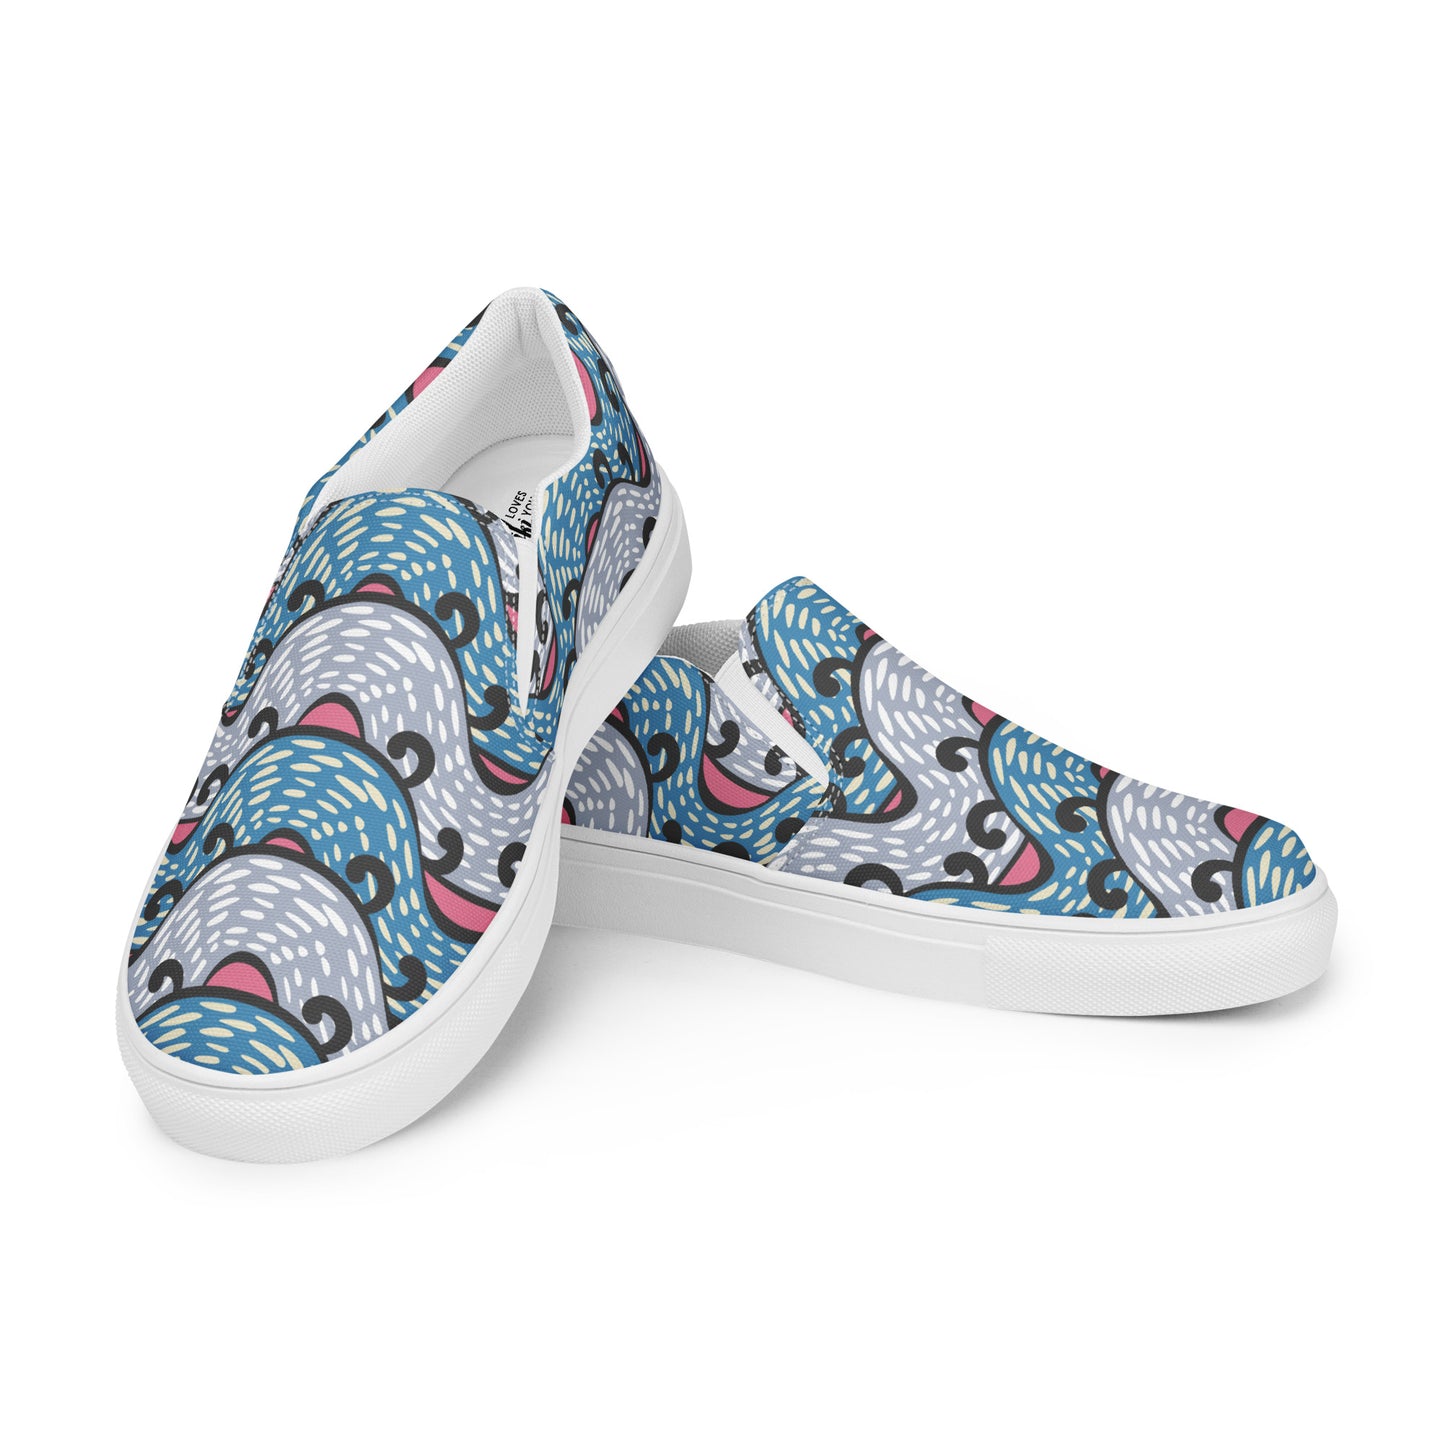 WAVES OF WAVES women’s canvas slip ons